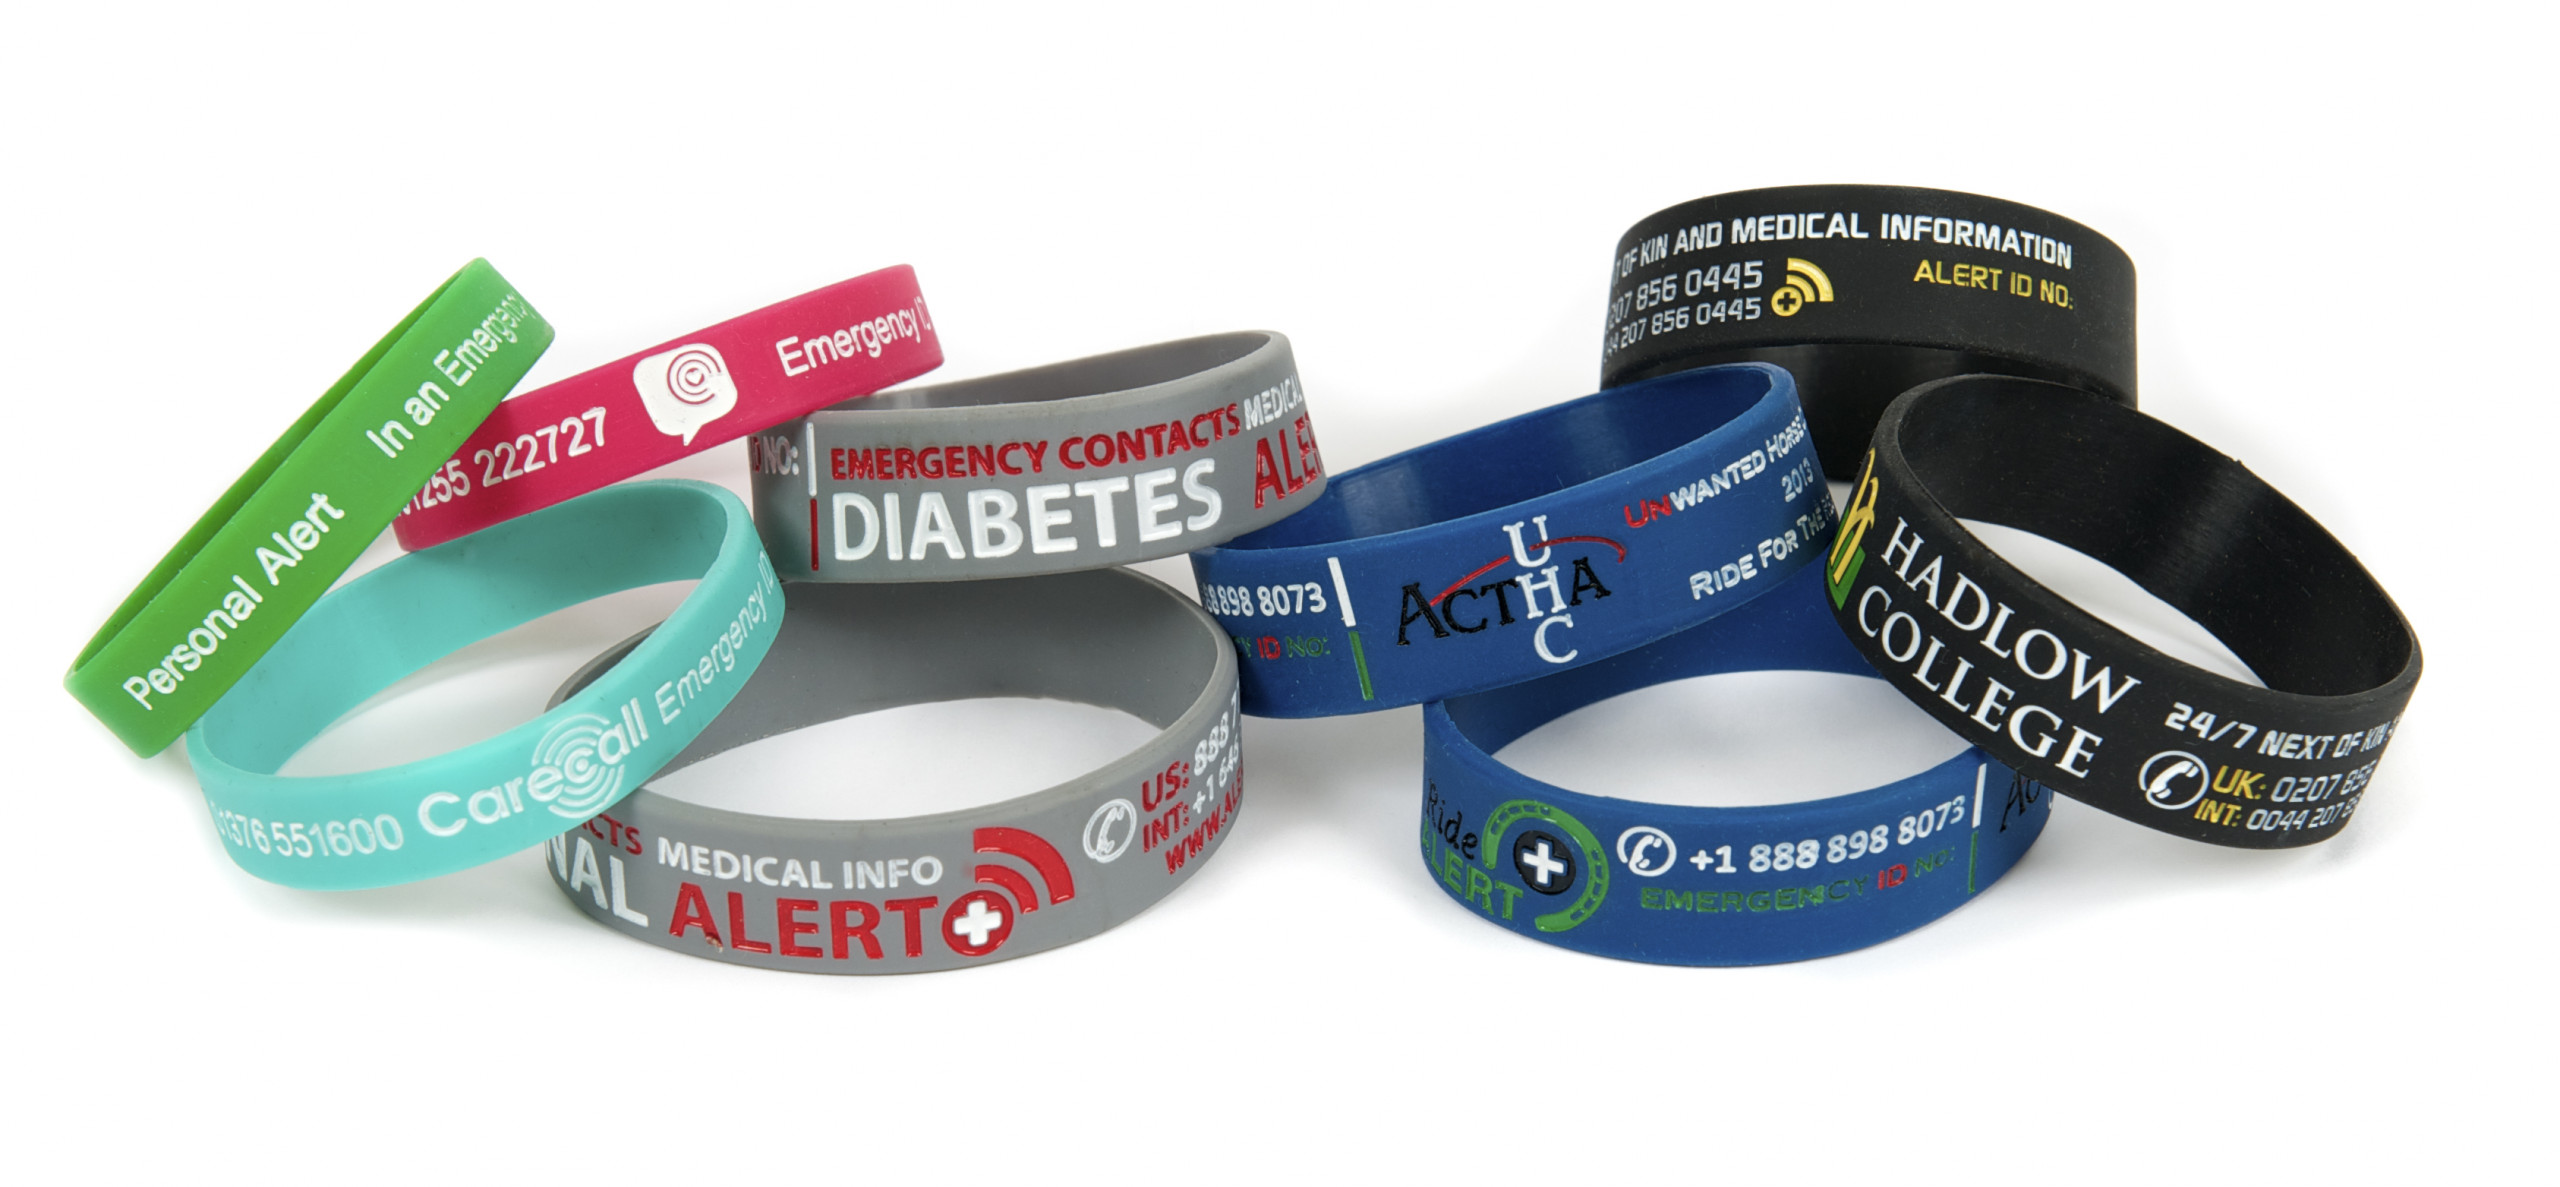 Fundraise and market your event or cause using wristbands